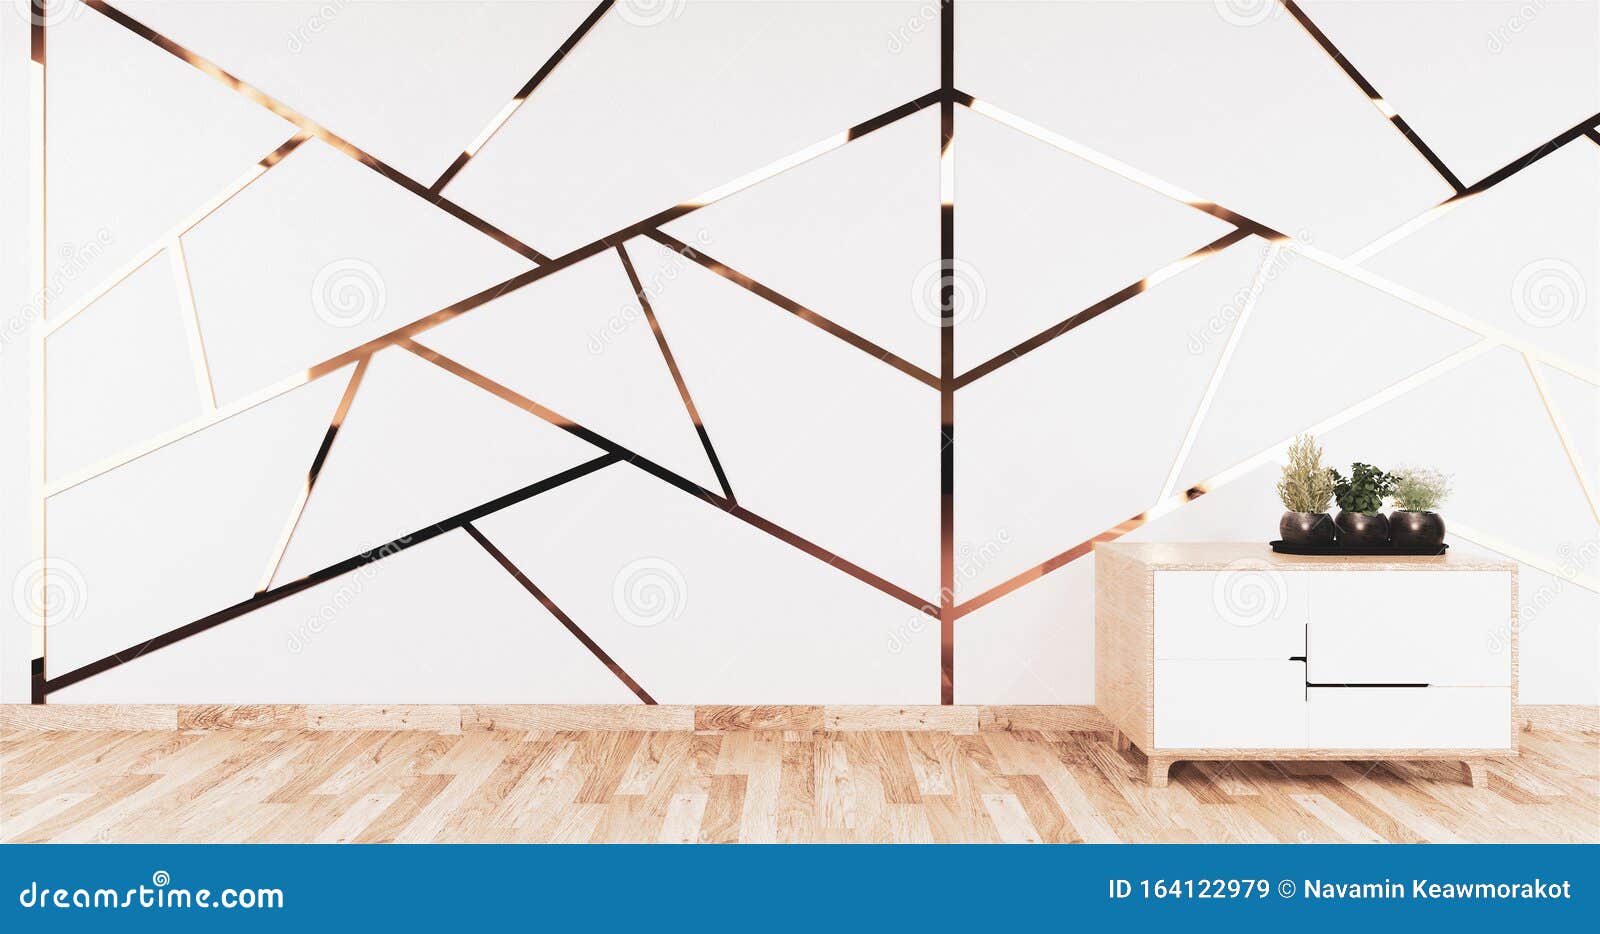 Aluminum Trim Gold On Wihte Wall Design And Wooden Floor With